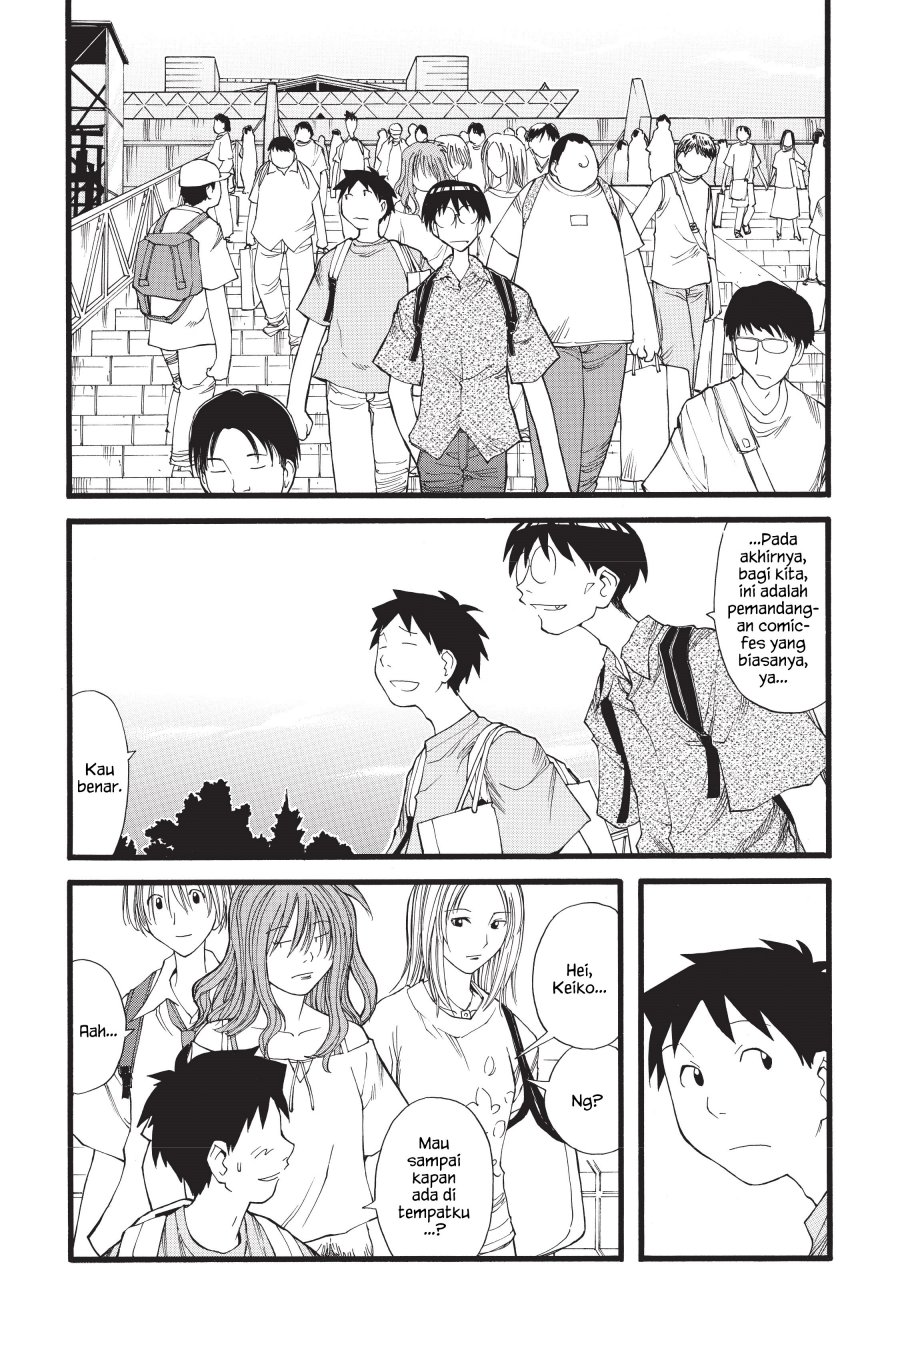 Genshiken – The Society for the Study of Modern Visual Culture Chapter 16 Image 19